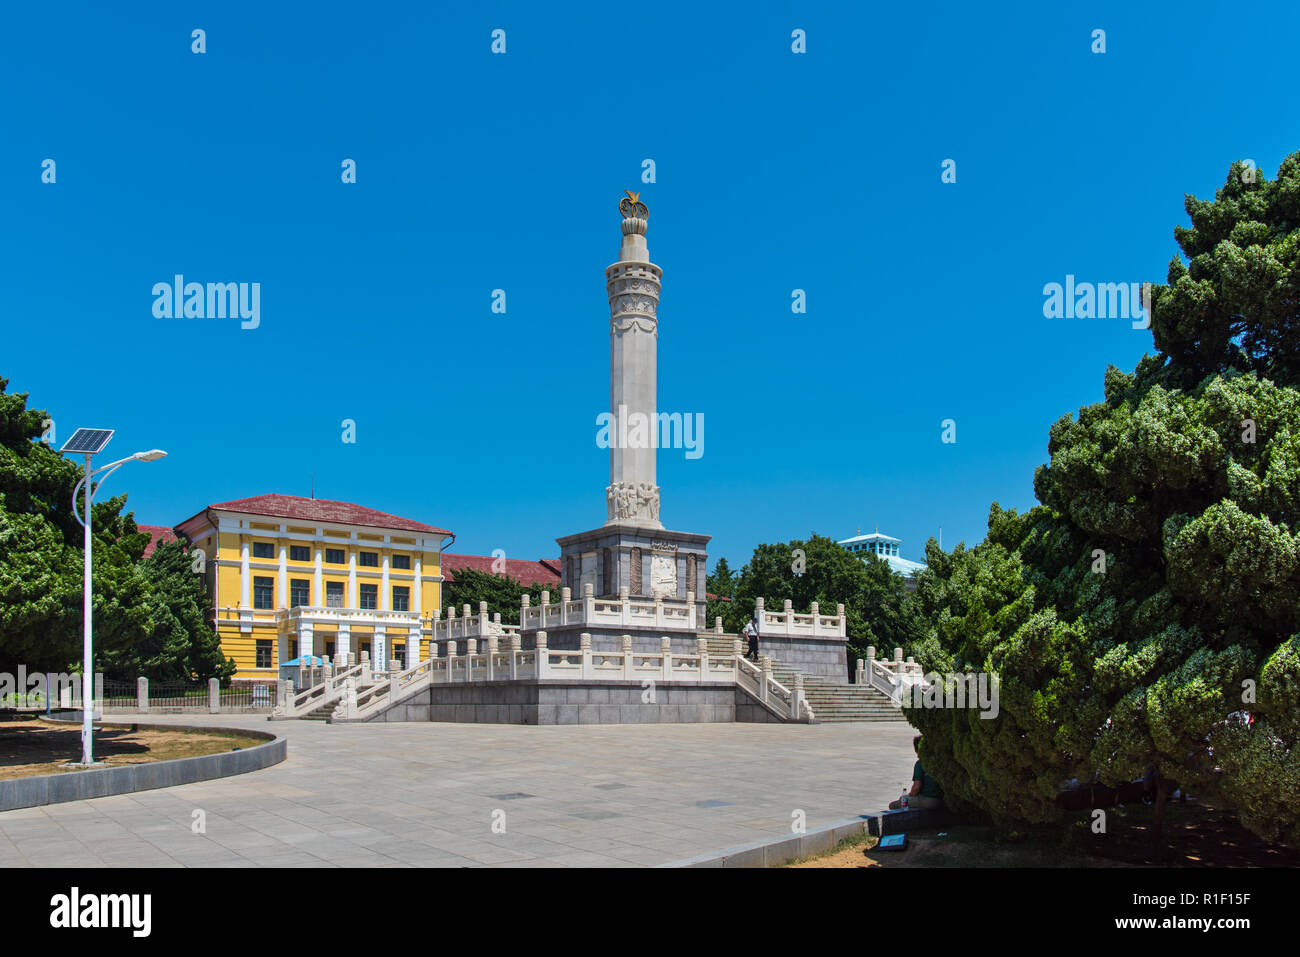 LUSHUN, LIAONING, CHINA - 22JUL2018: The Sino-Soviet Friendship Monument is located outside the Museum in Lushun. Stock Photo